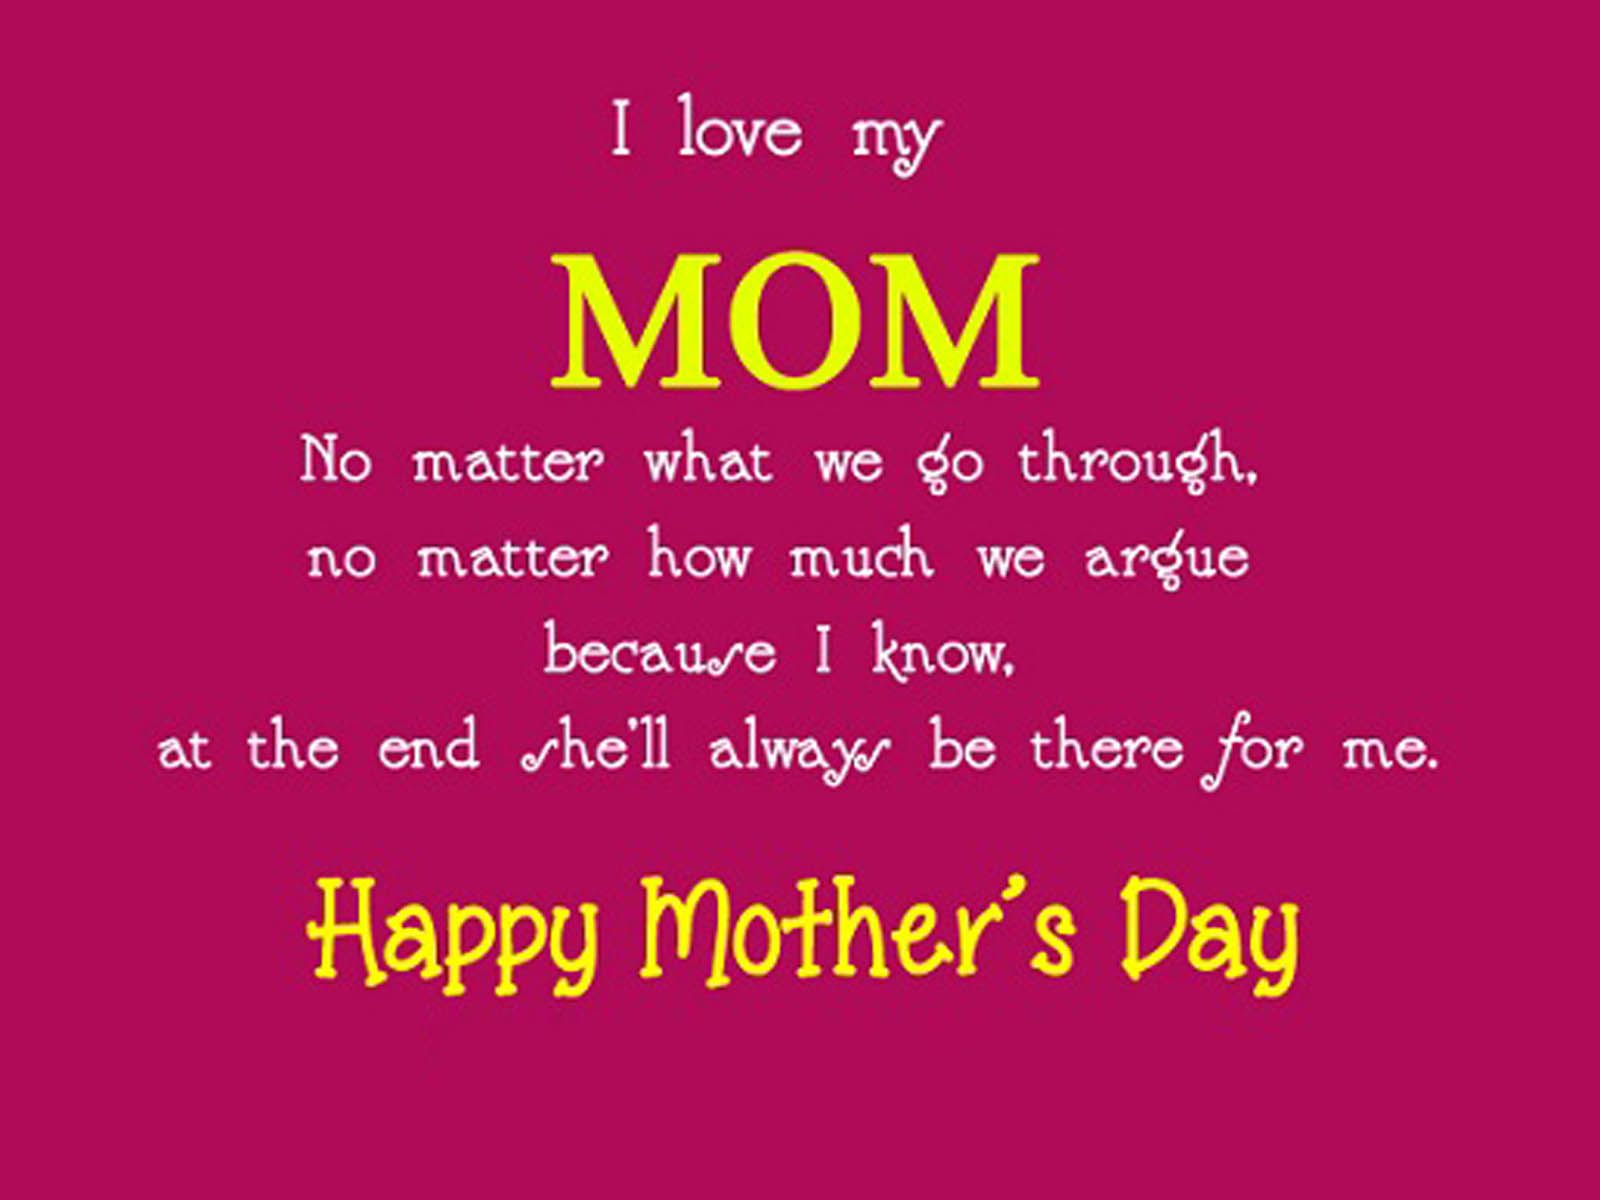 HD Wallpaper: Happy Mother's Day Quotes